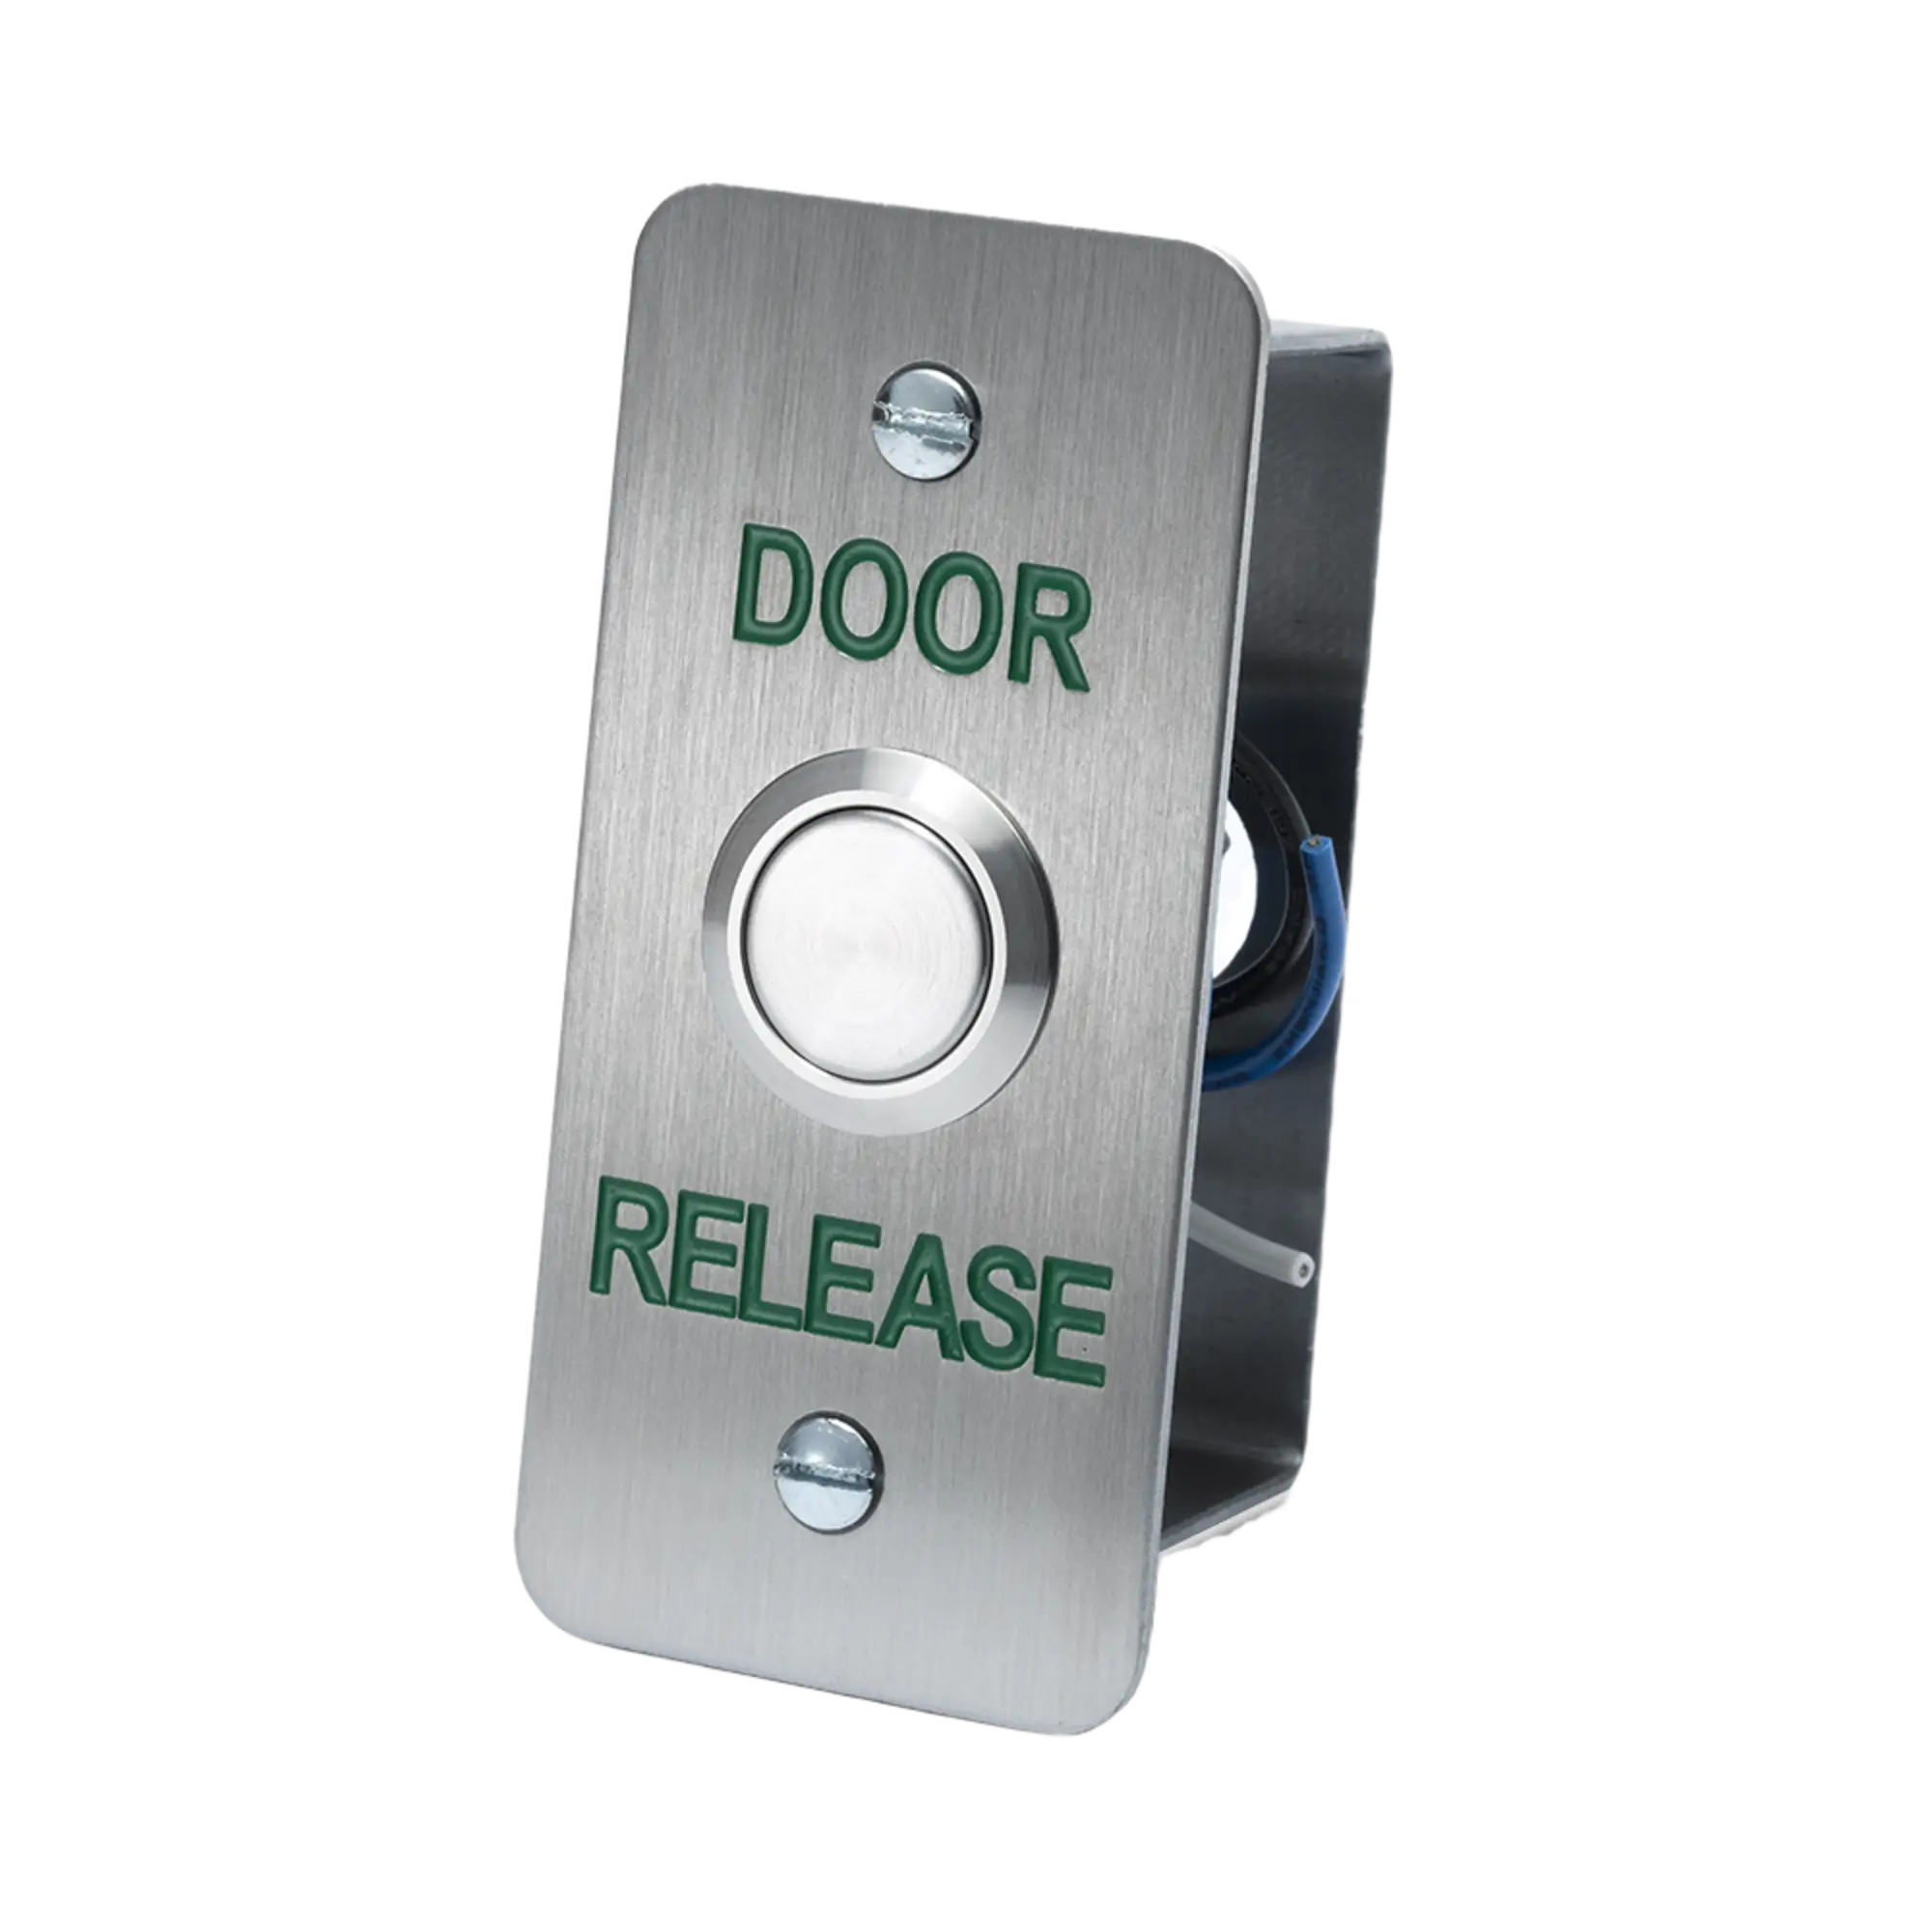 Stainless Steel Slimline Exit Button For Architraves With "Door Release" Legend